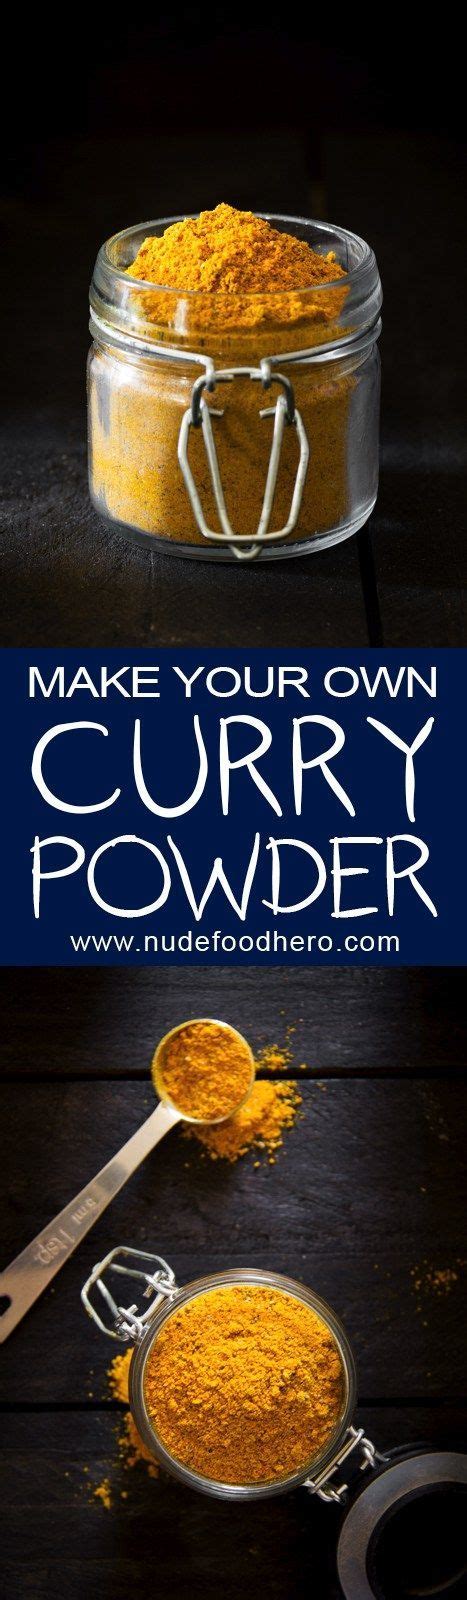 Savory Eats Make Your Own Curry Powder The Nude Food Hero